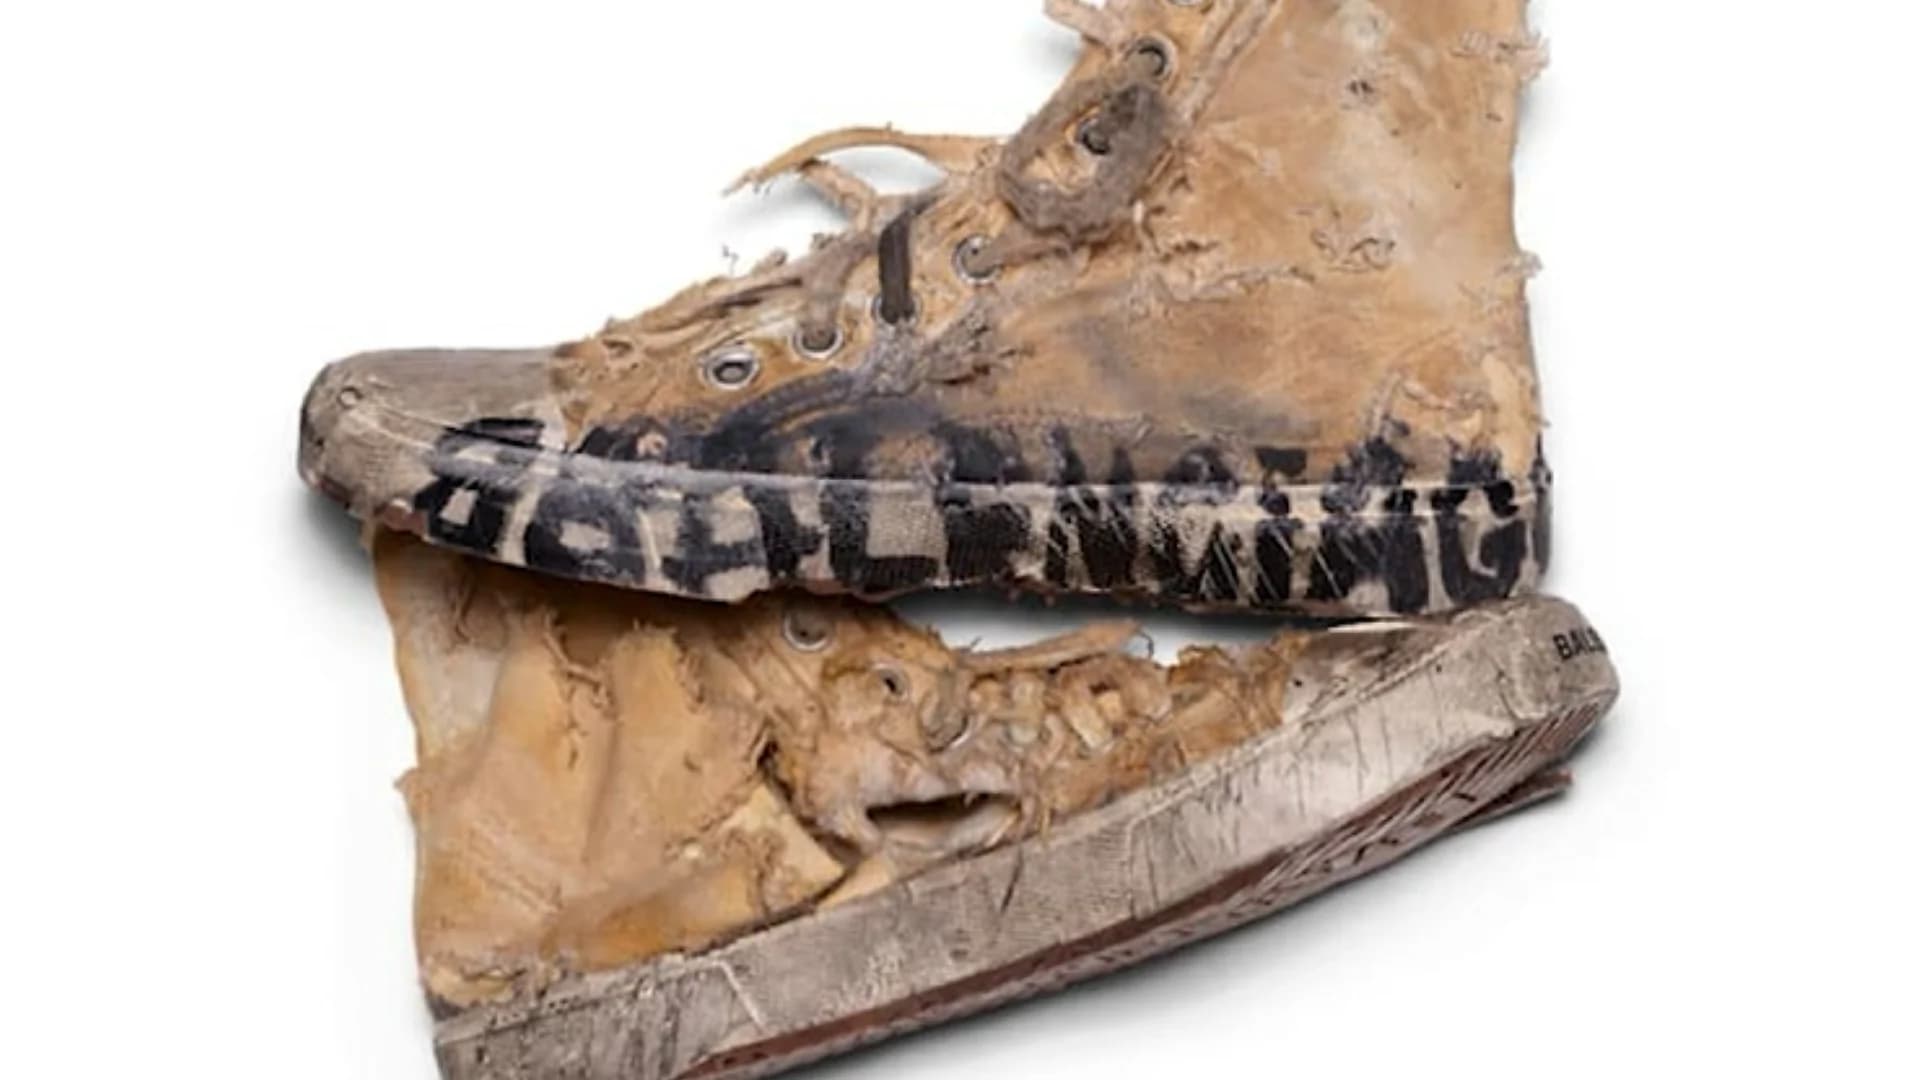 WHAT'S HOT: Balenciaga launches old, dirty sneakers for nearly $2,000